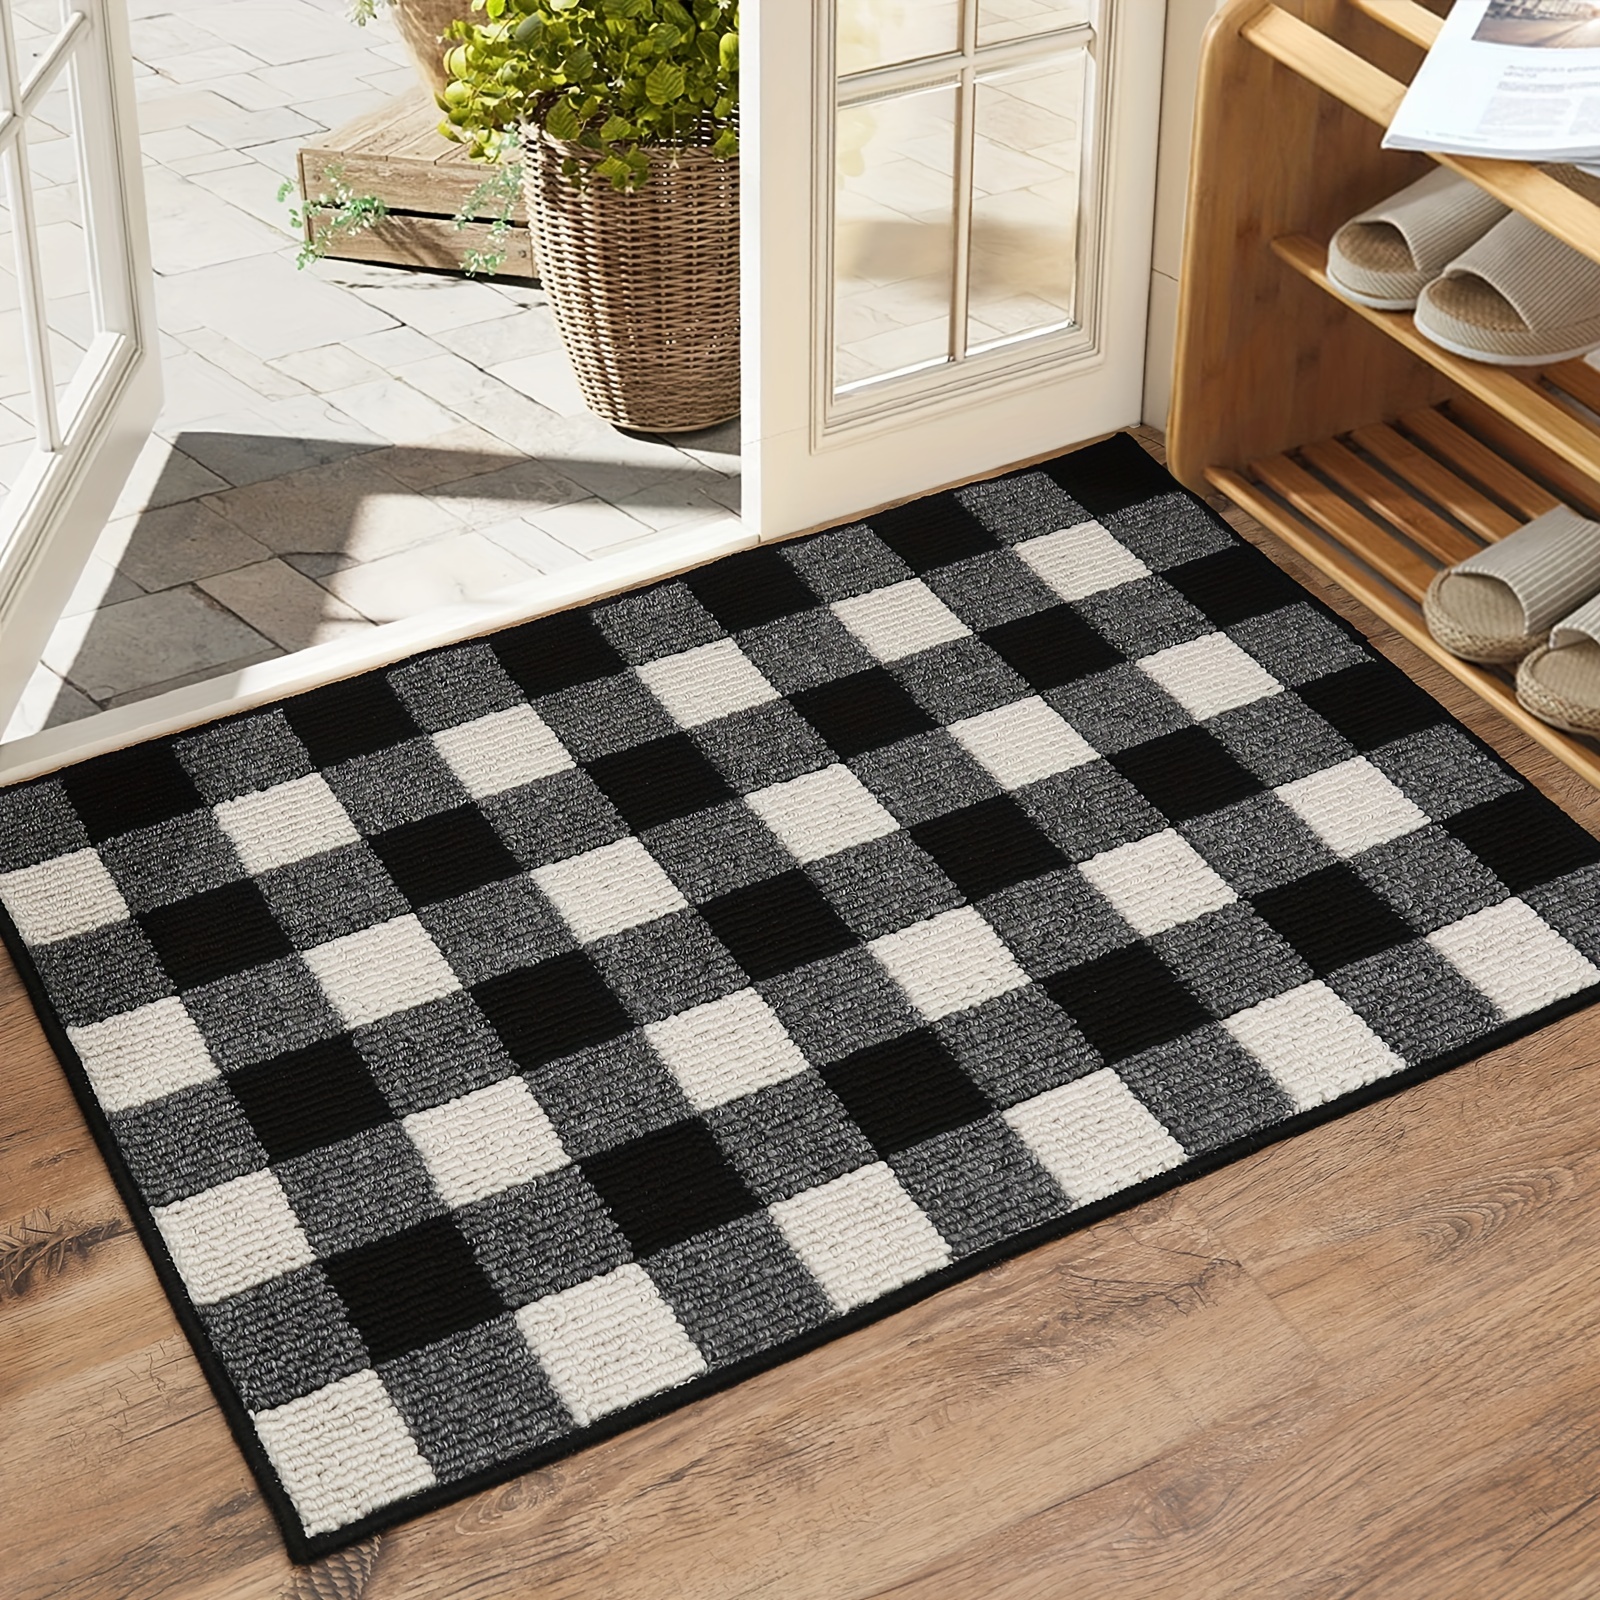 Buffalo Check Outdoor Rug 23.6X35.4 Cotton Hand Woven Check Front Door  Mat, Washable Black Outdoor Rug For Porch/Front Porch/Farmhouse Black And  White 